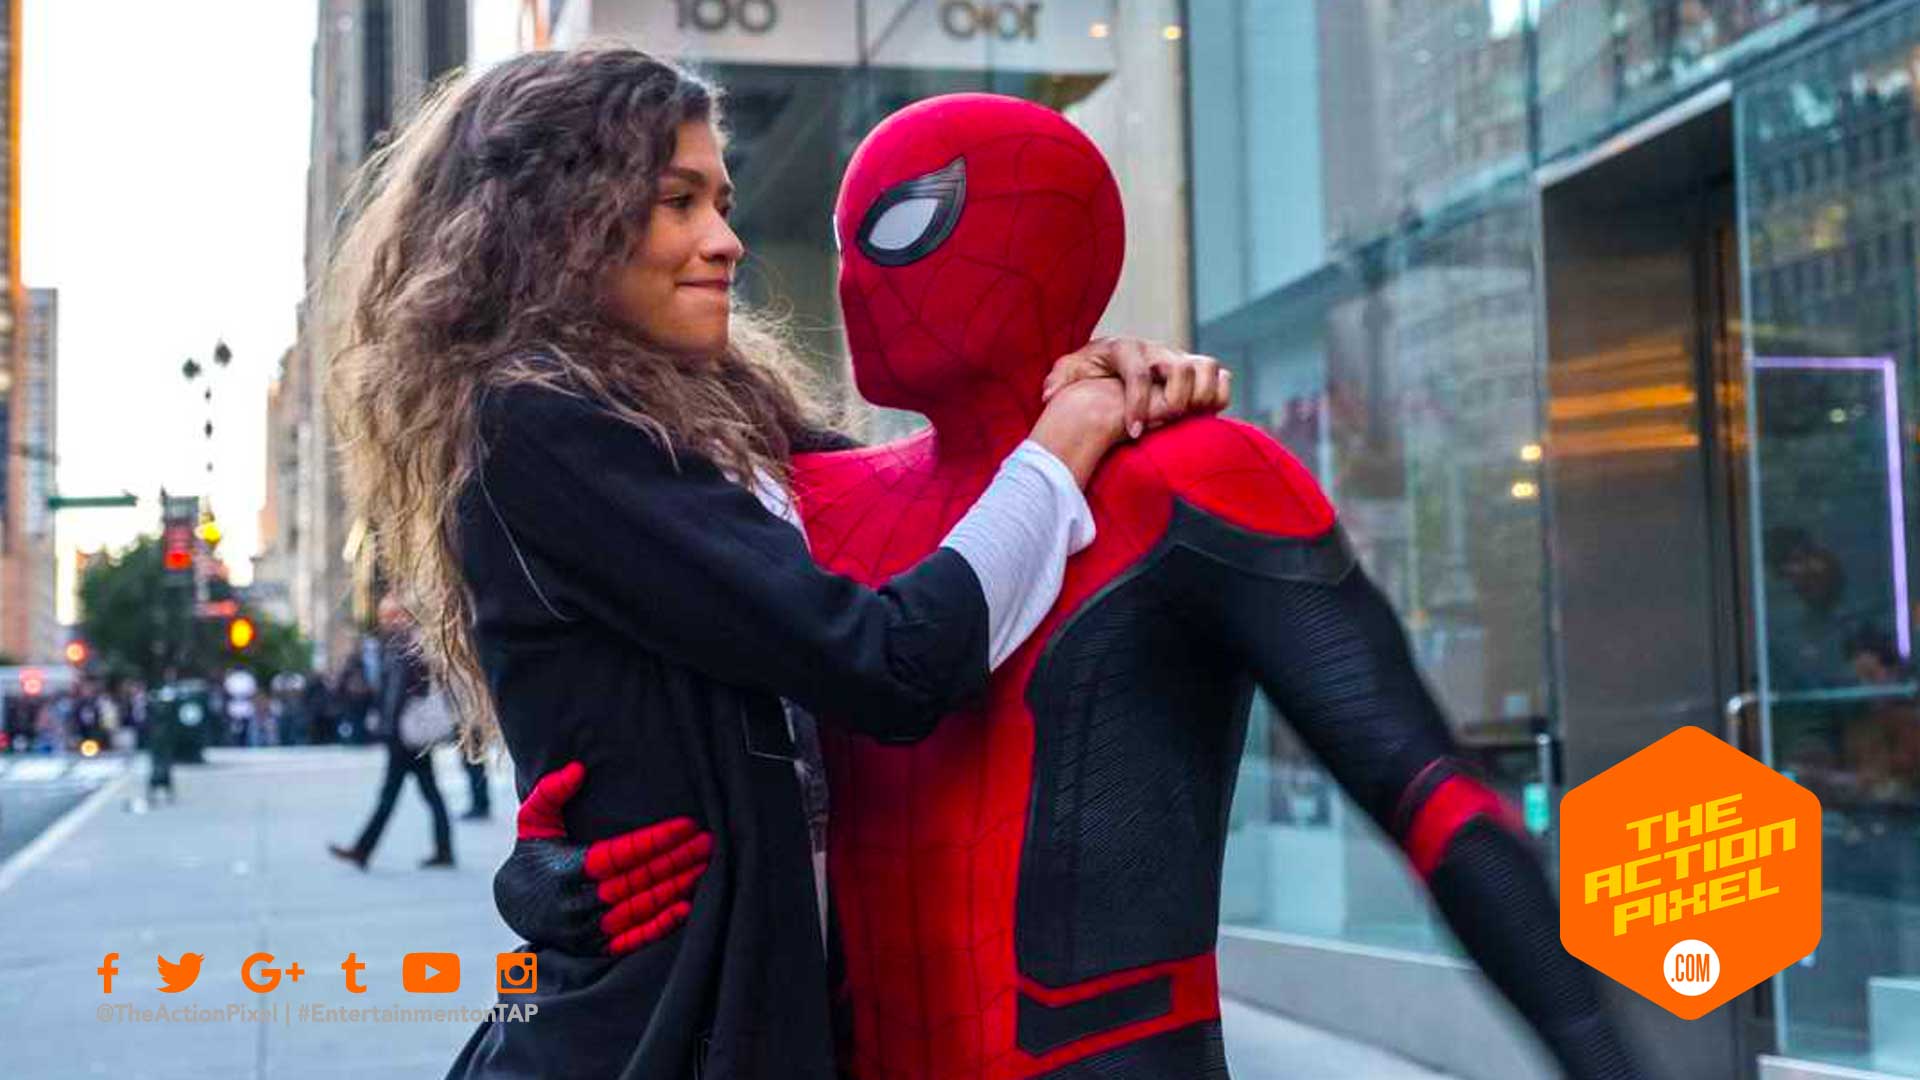 New “Spider Man: Far From Home” Image Released